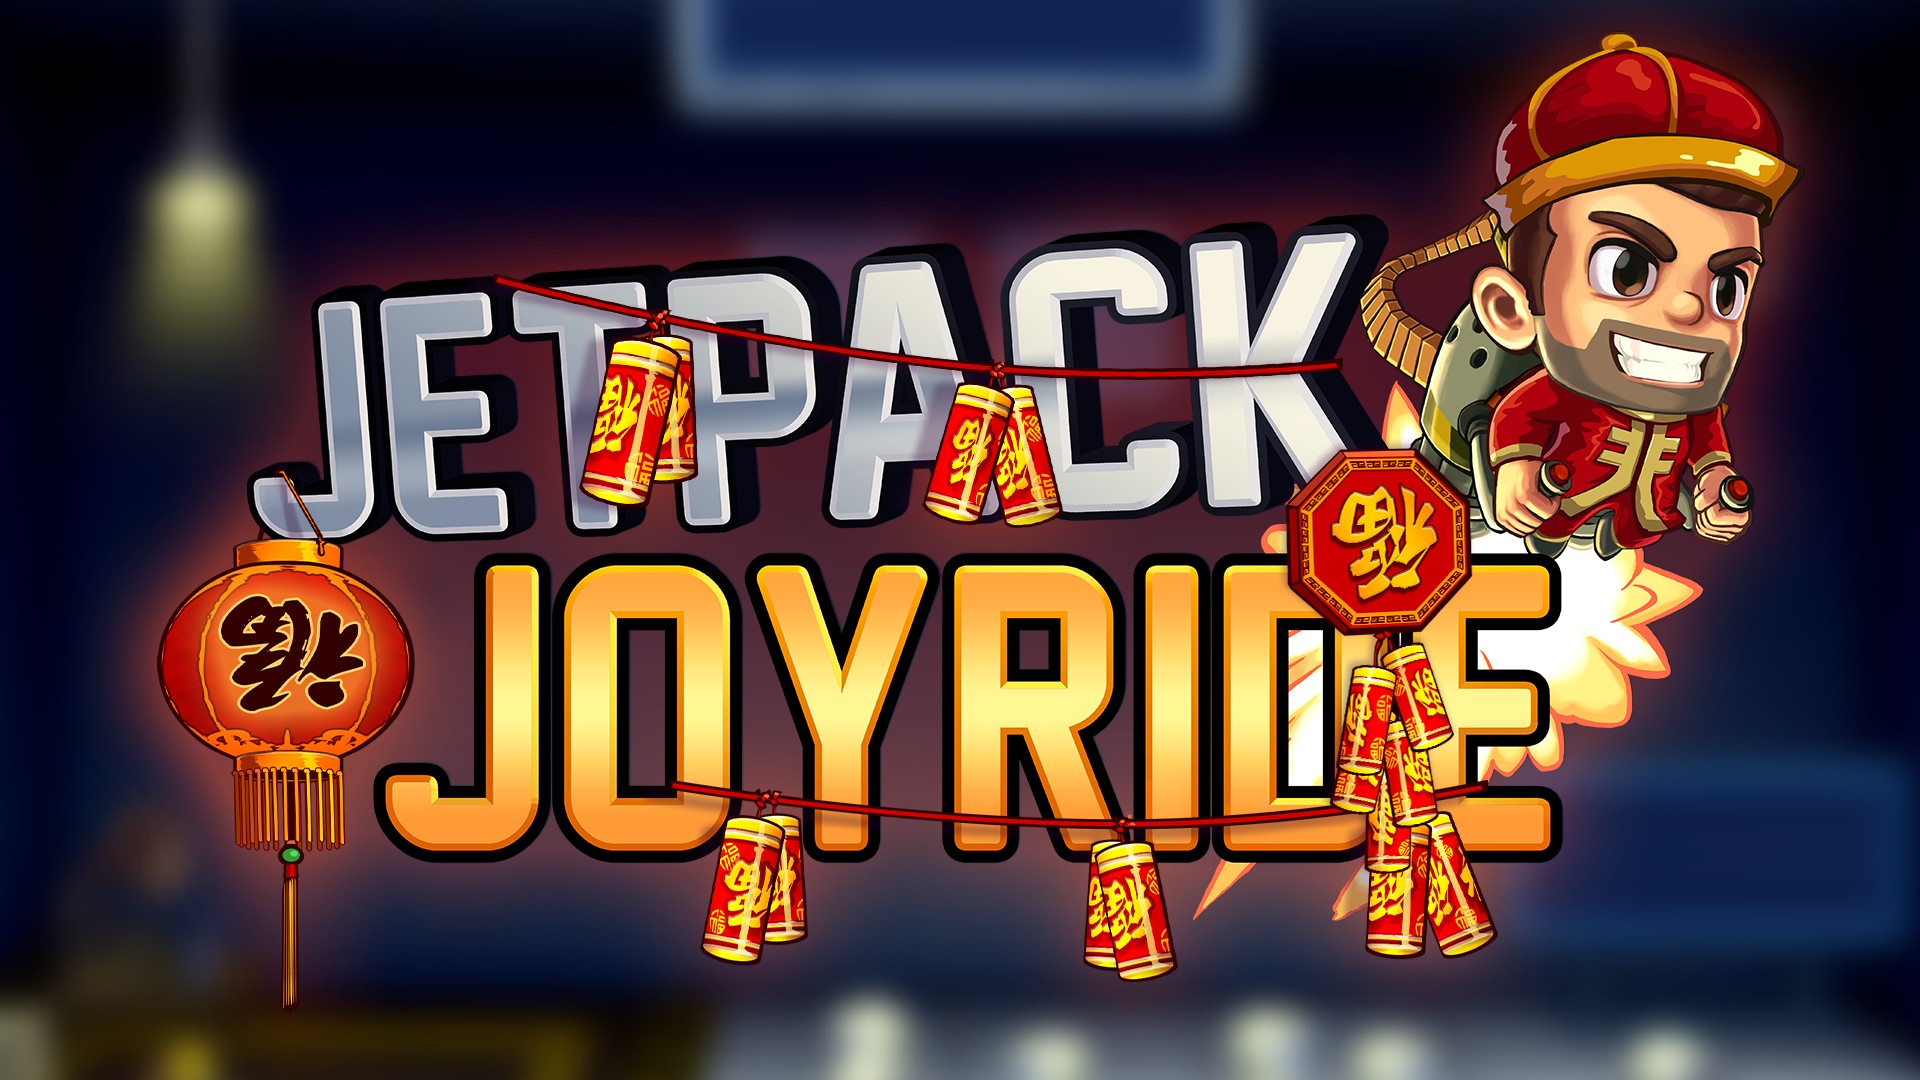 Jetpack Joyride Updated Their Cover Photo